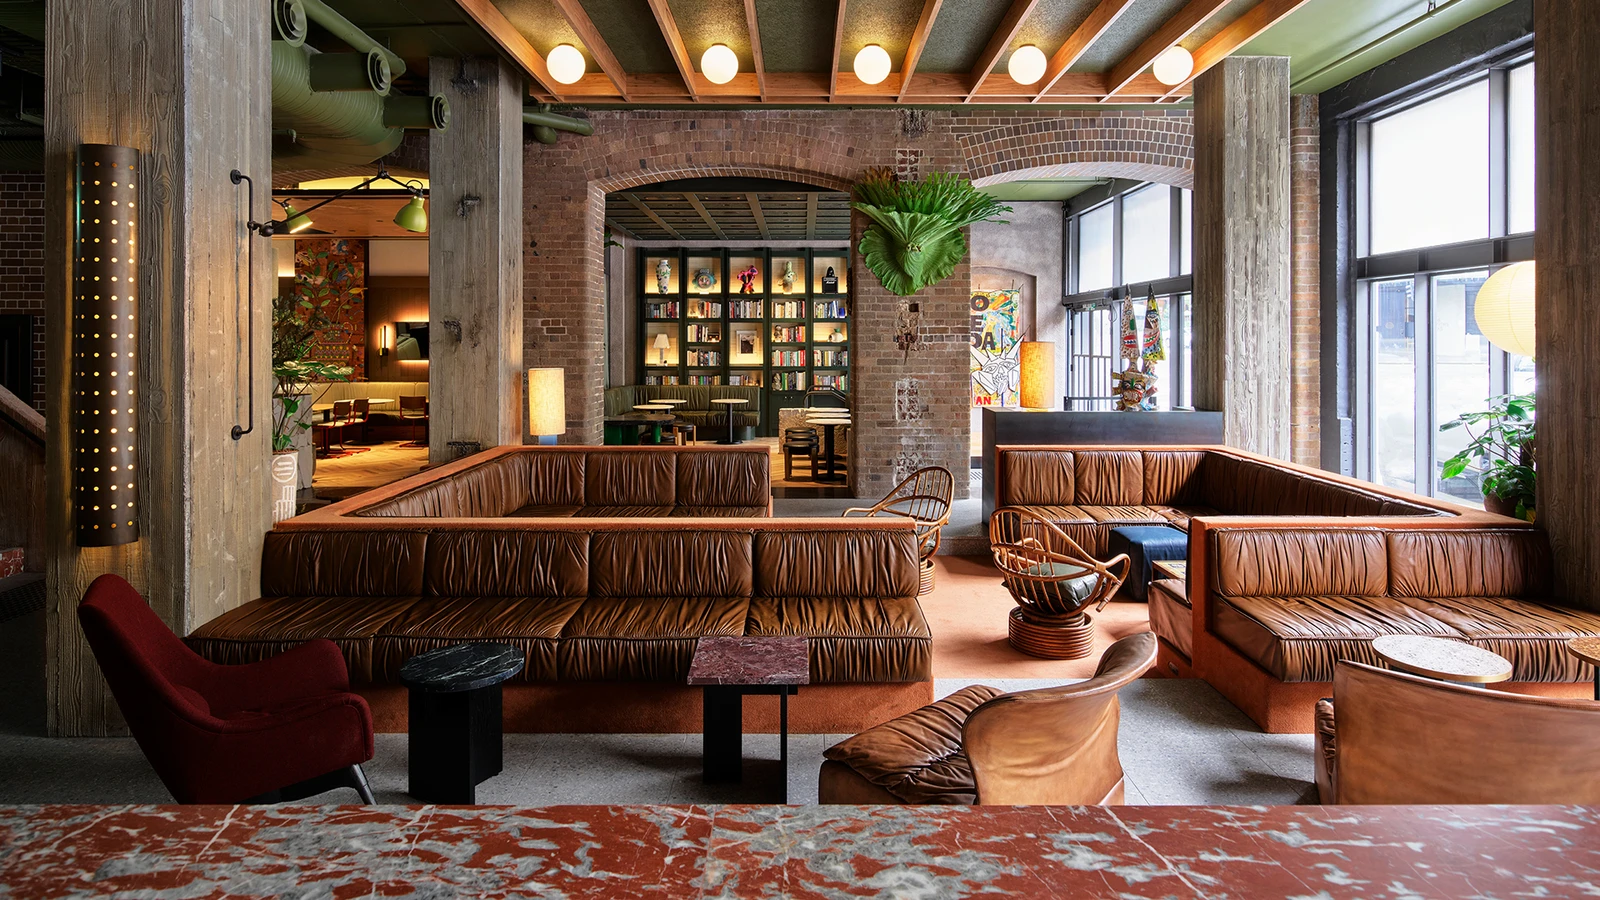 The Lobby Bar in Ace Hotel Sydney, a boutique stay located in an old kiln factory.